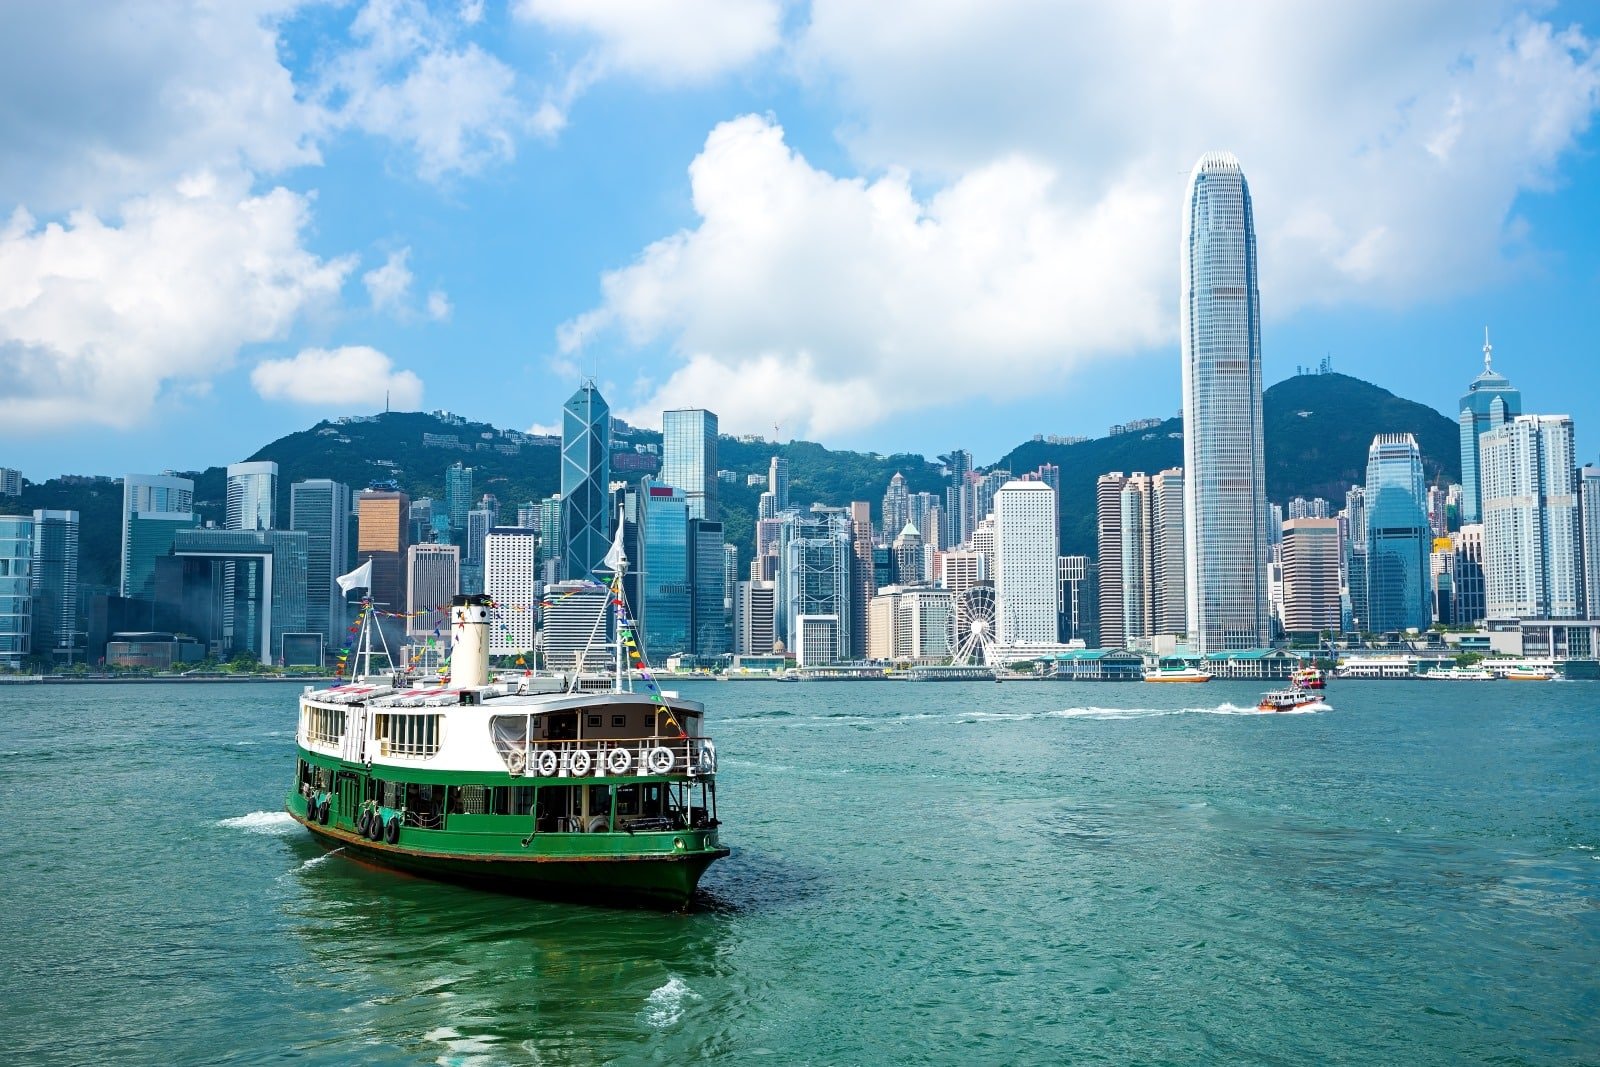 <p><span>The Star Ferry, a historic mode of transport between Hong Kong Island and Kowloon, is a symbol of the city’s heritage. The ferry ride offers a unique perspective of Hong Kong’s iconic skyline, set against the backdrop of Victoria Harbour.</span></p> <p><span>The experience of crossing the harbor on the Star Ferry is both humbling and awe-inspiring, as one witnesses the grandeur of the city from a vantage point that has remained unchanged for over a century. The gentle rhythm of the ferry’s journey and its panoramic views make it a must-do for anyone seeking to experience the essence of Hong Kong.</span> </p> <p><b>Insider’s Tip: </b><span>Take a ride at night to see the Symphony of Lights, a spectacular light and sound show featuring more than 40 buildings on both sides of the harbor.</span></p> <p><b>How To Get There: </b><span>Ferries depart from Central Pier on Hong Kong Island and Tsim Sha Tsui Pier in Kowloon.</span></p> <p><b>Best Time To Travel: </b><span>Evening rides offer the most dramatic views of the city’s illuminated skyline.</span></p>